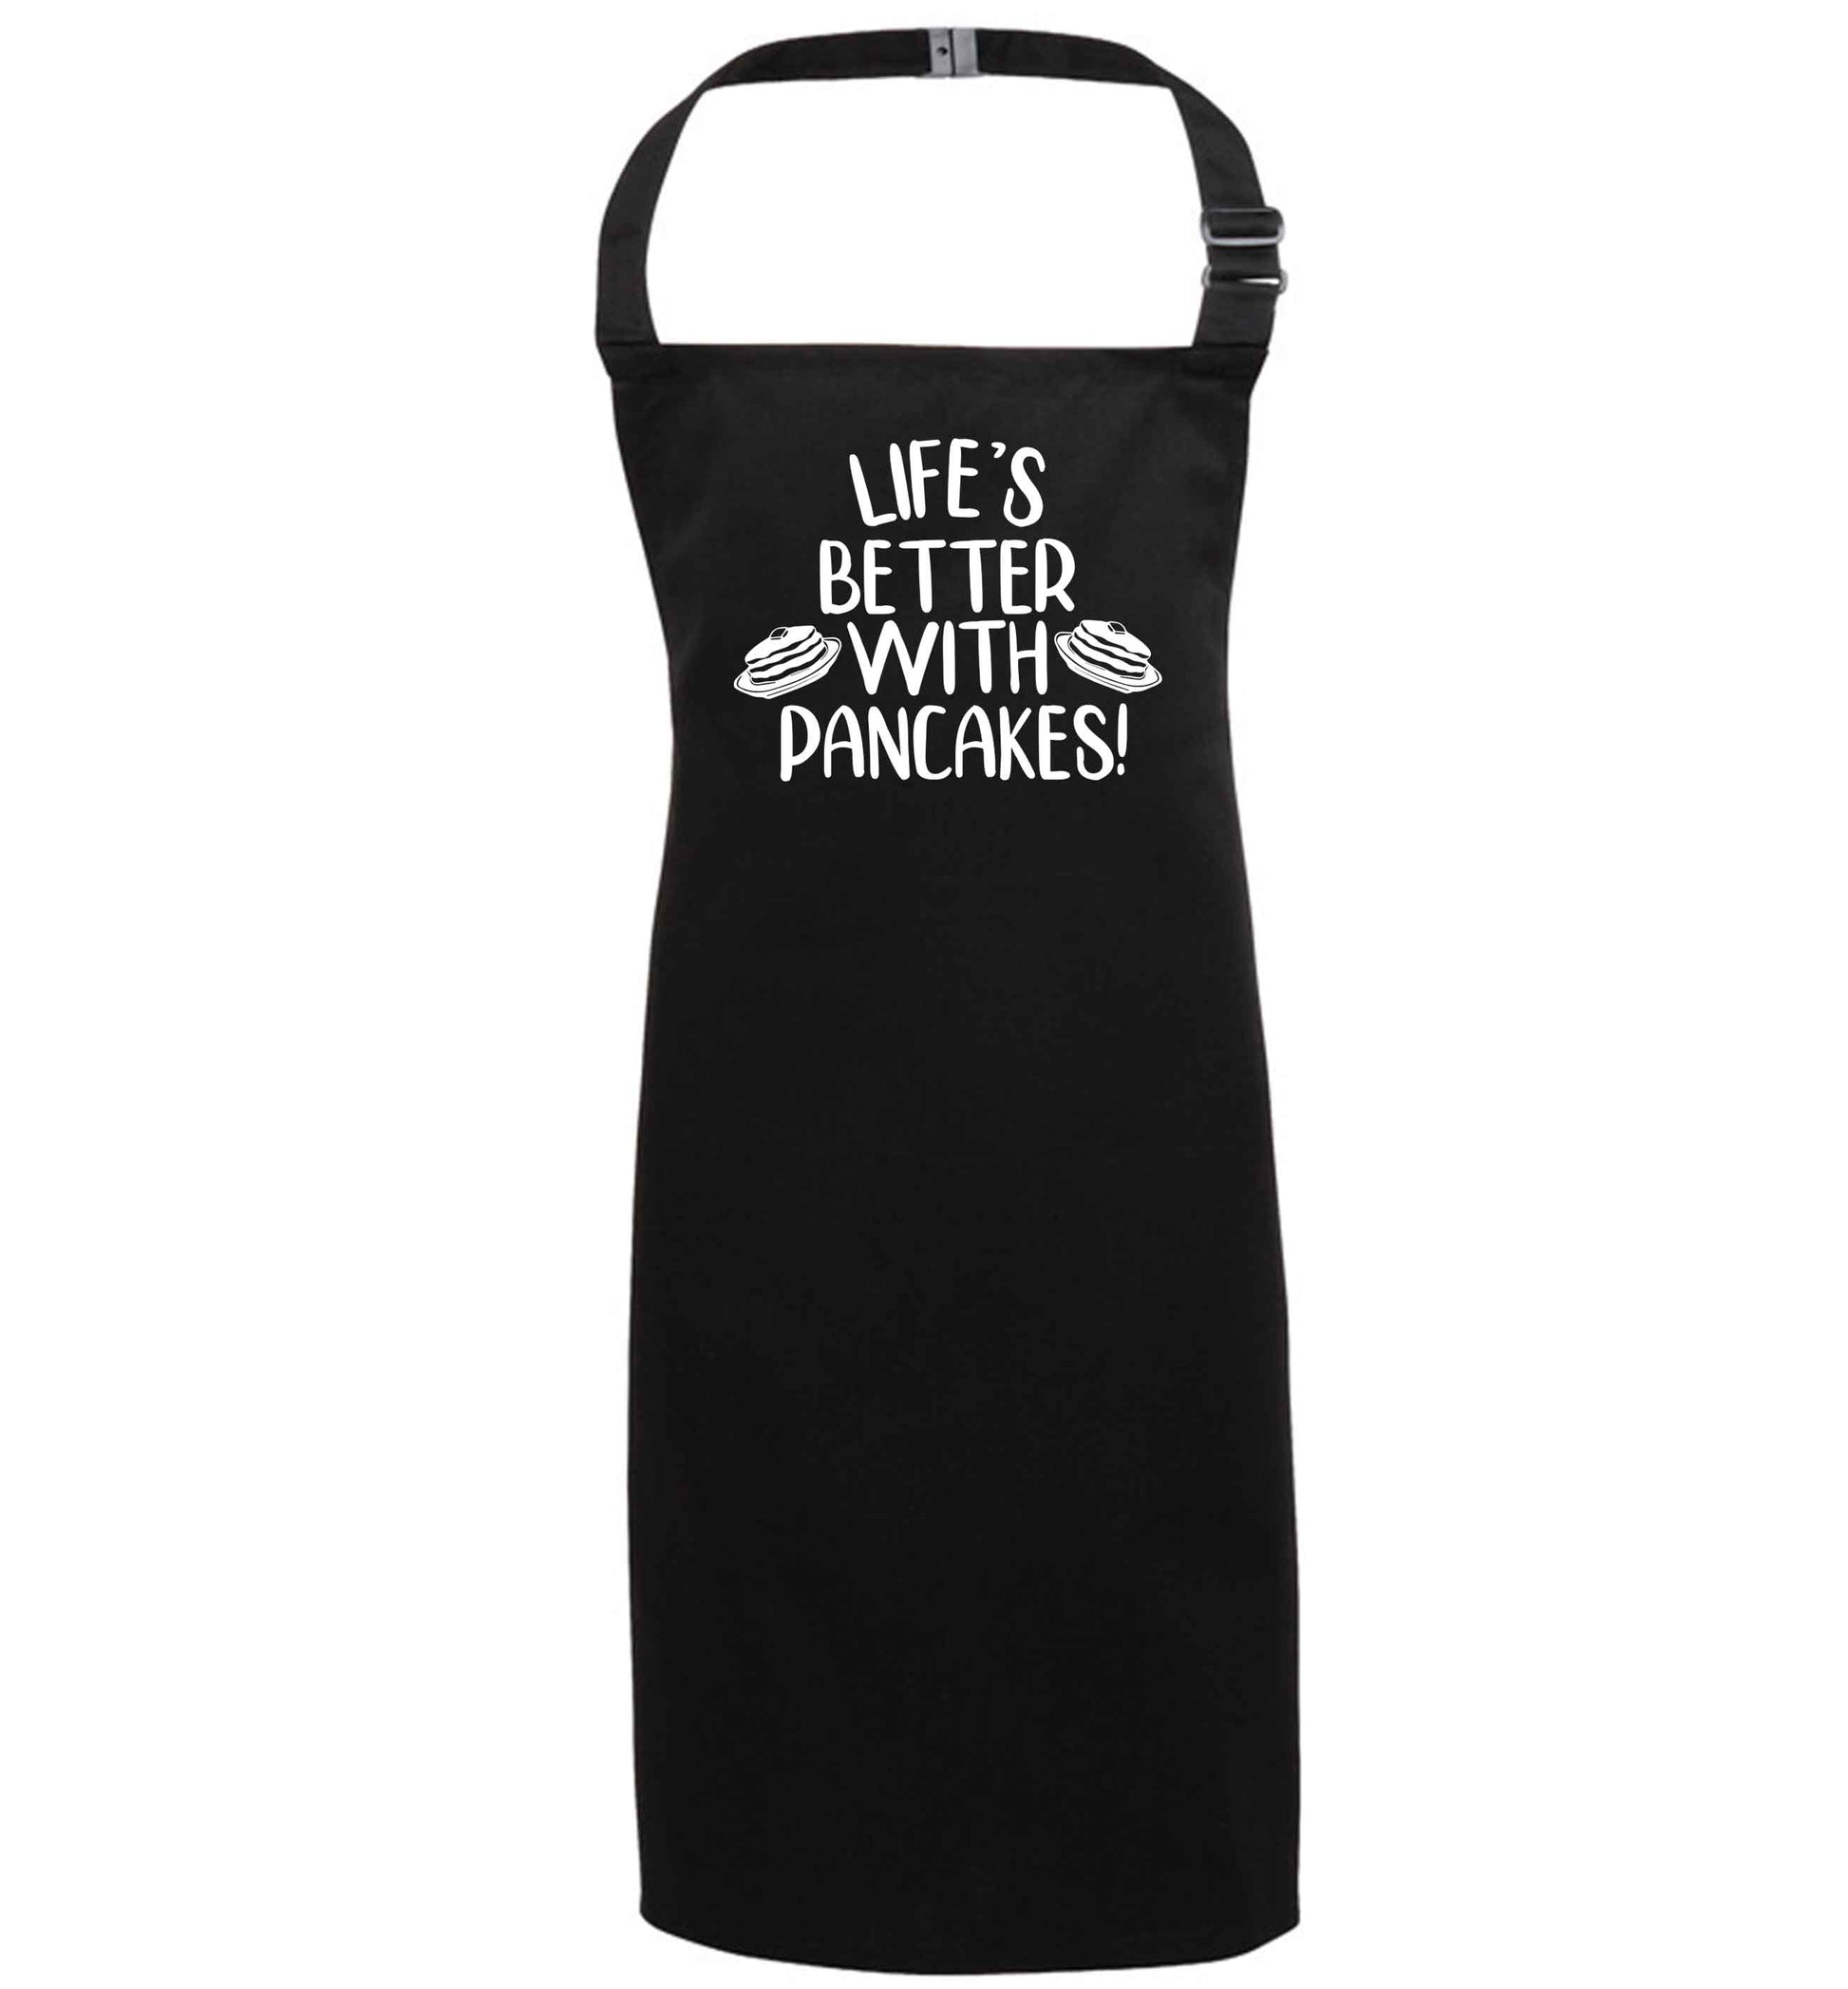 Life's better with pancakes black apron 7-10 years